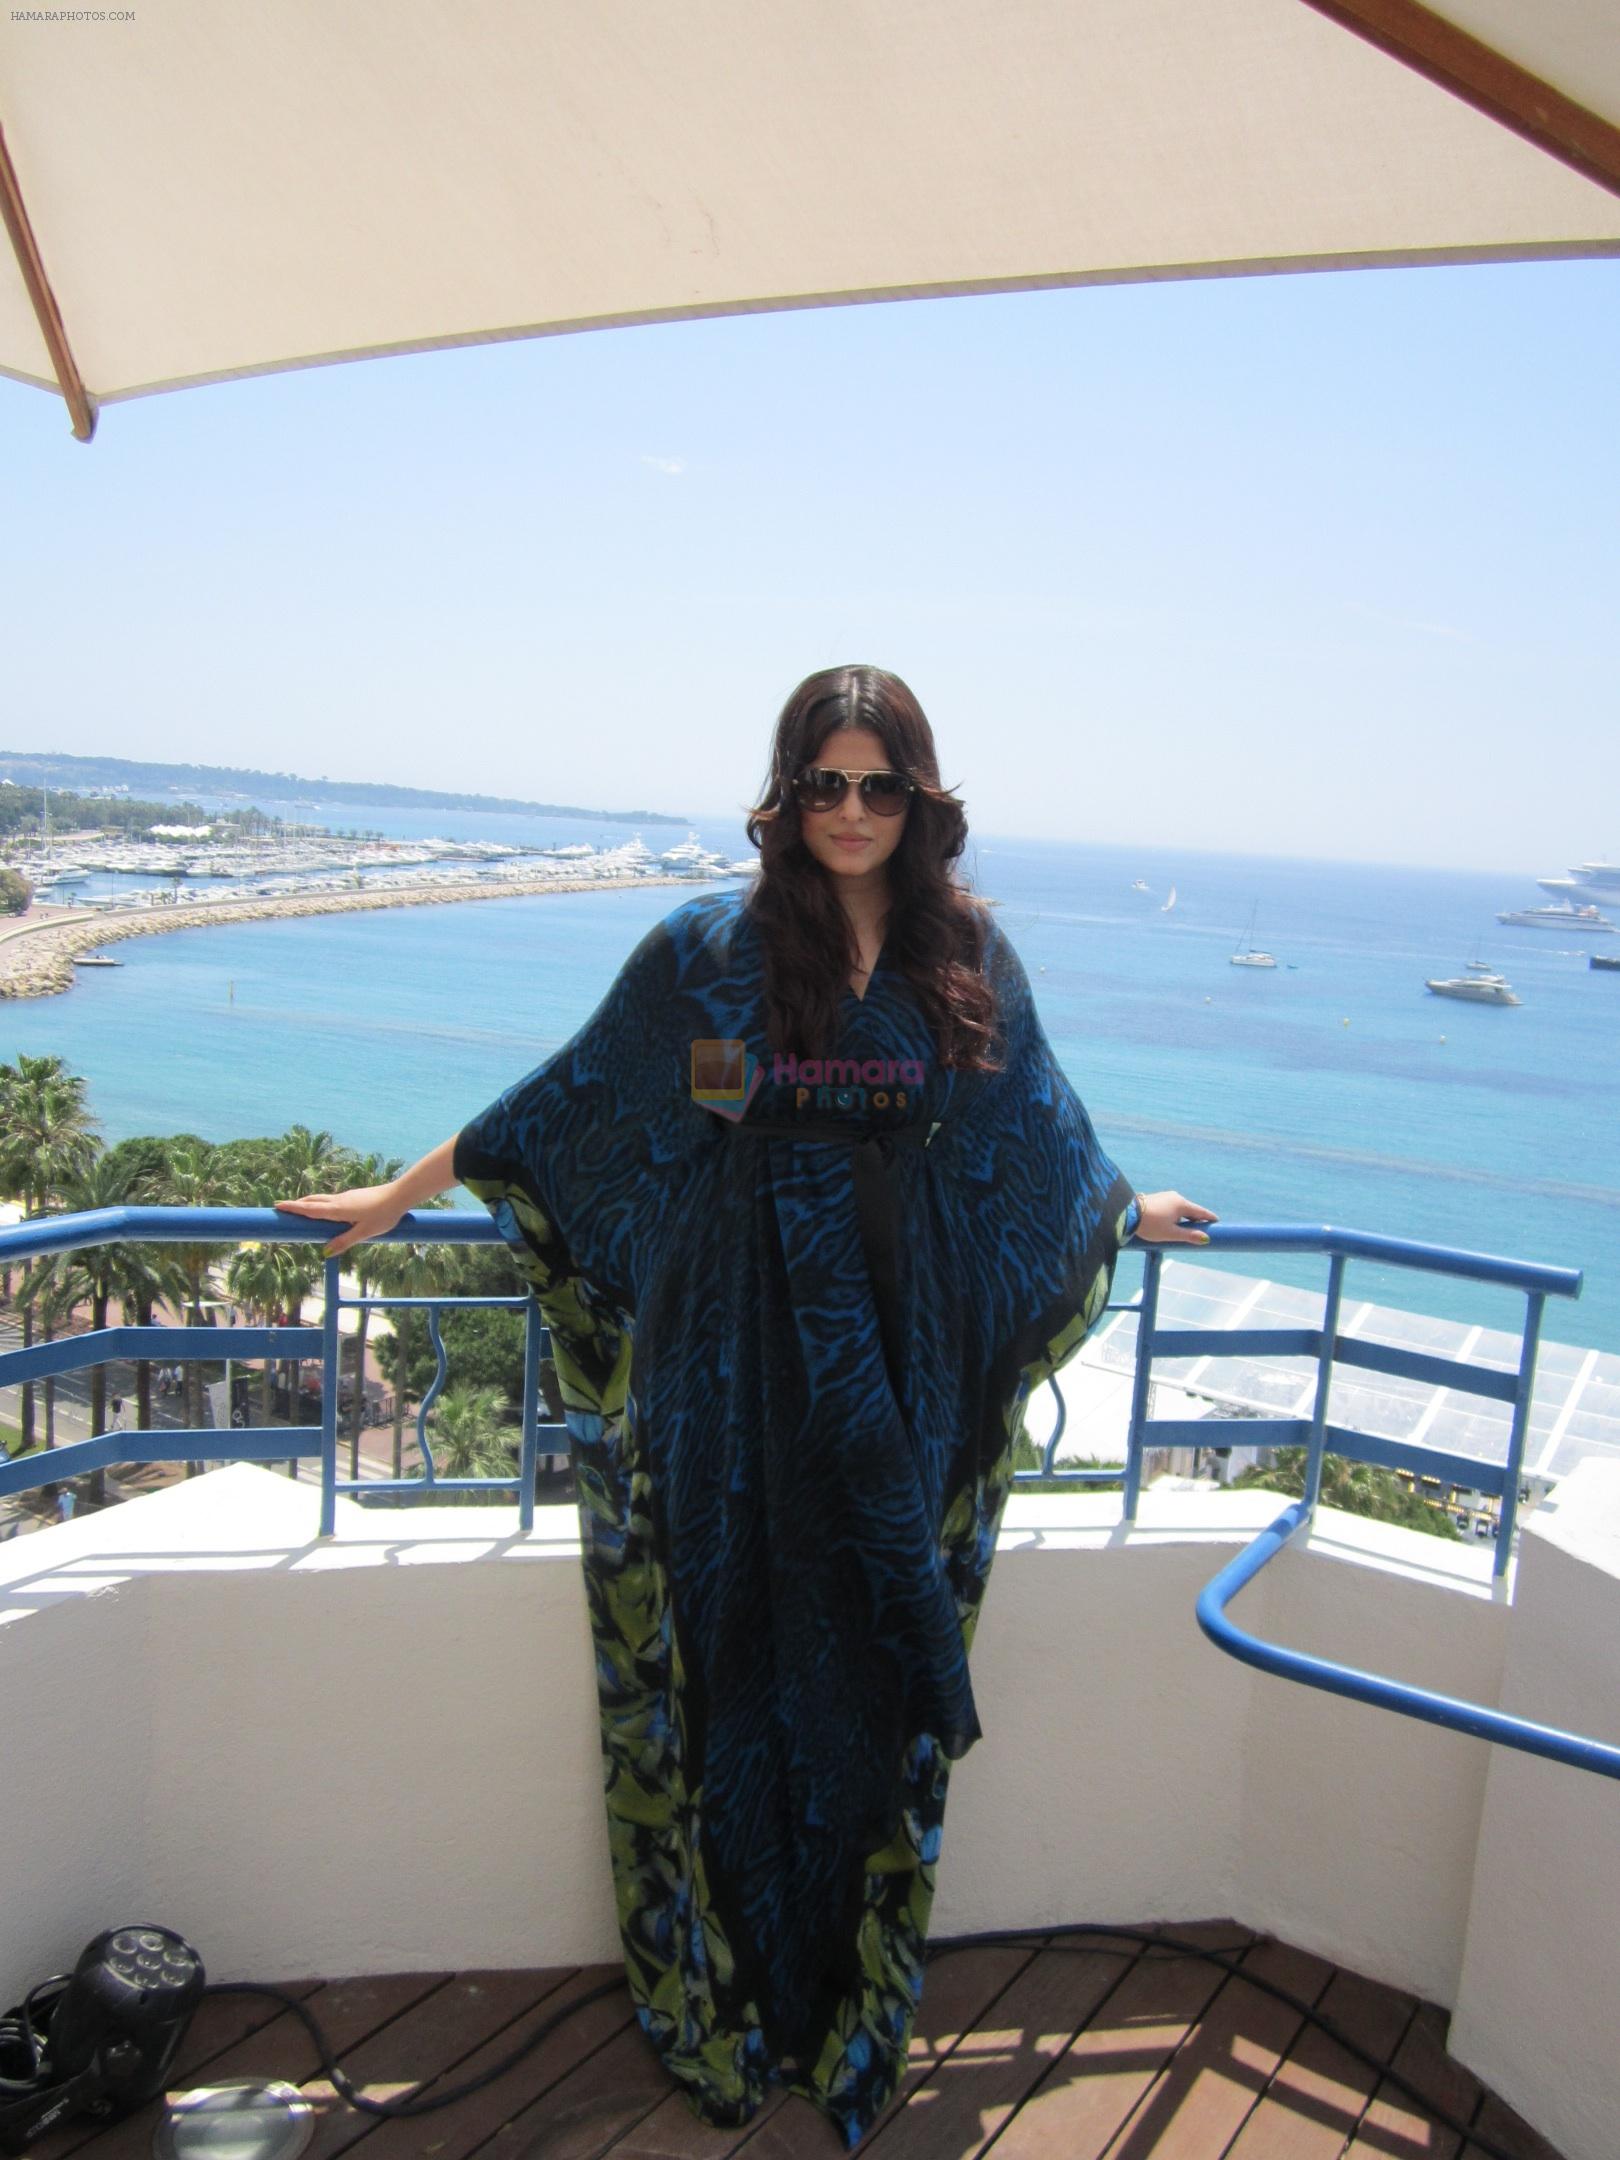 Aishwarya Rai Bachchan is wearing Roberto Cavalli Kaftan and the shoes are Giuseppe Zanotti at the Media Call Day 2 at Cannes Film Festival on 23rd May 2012